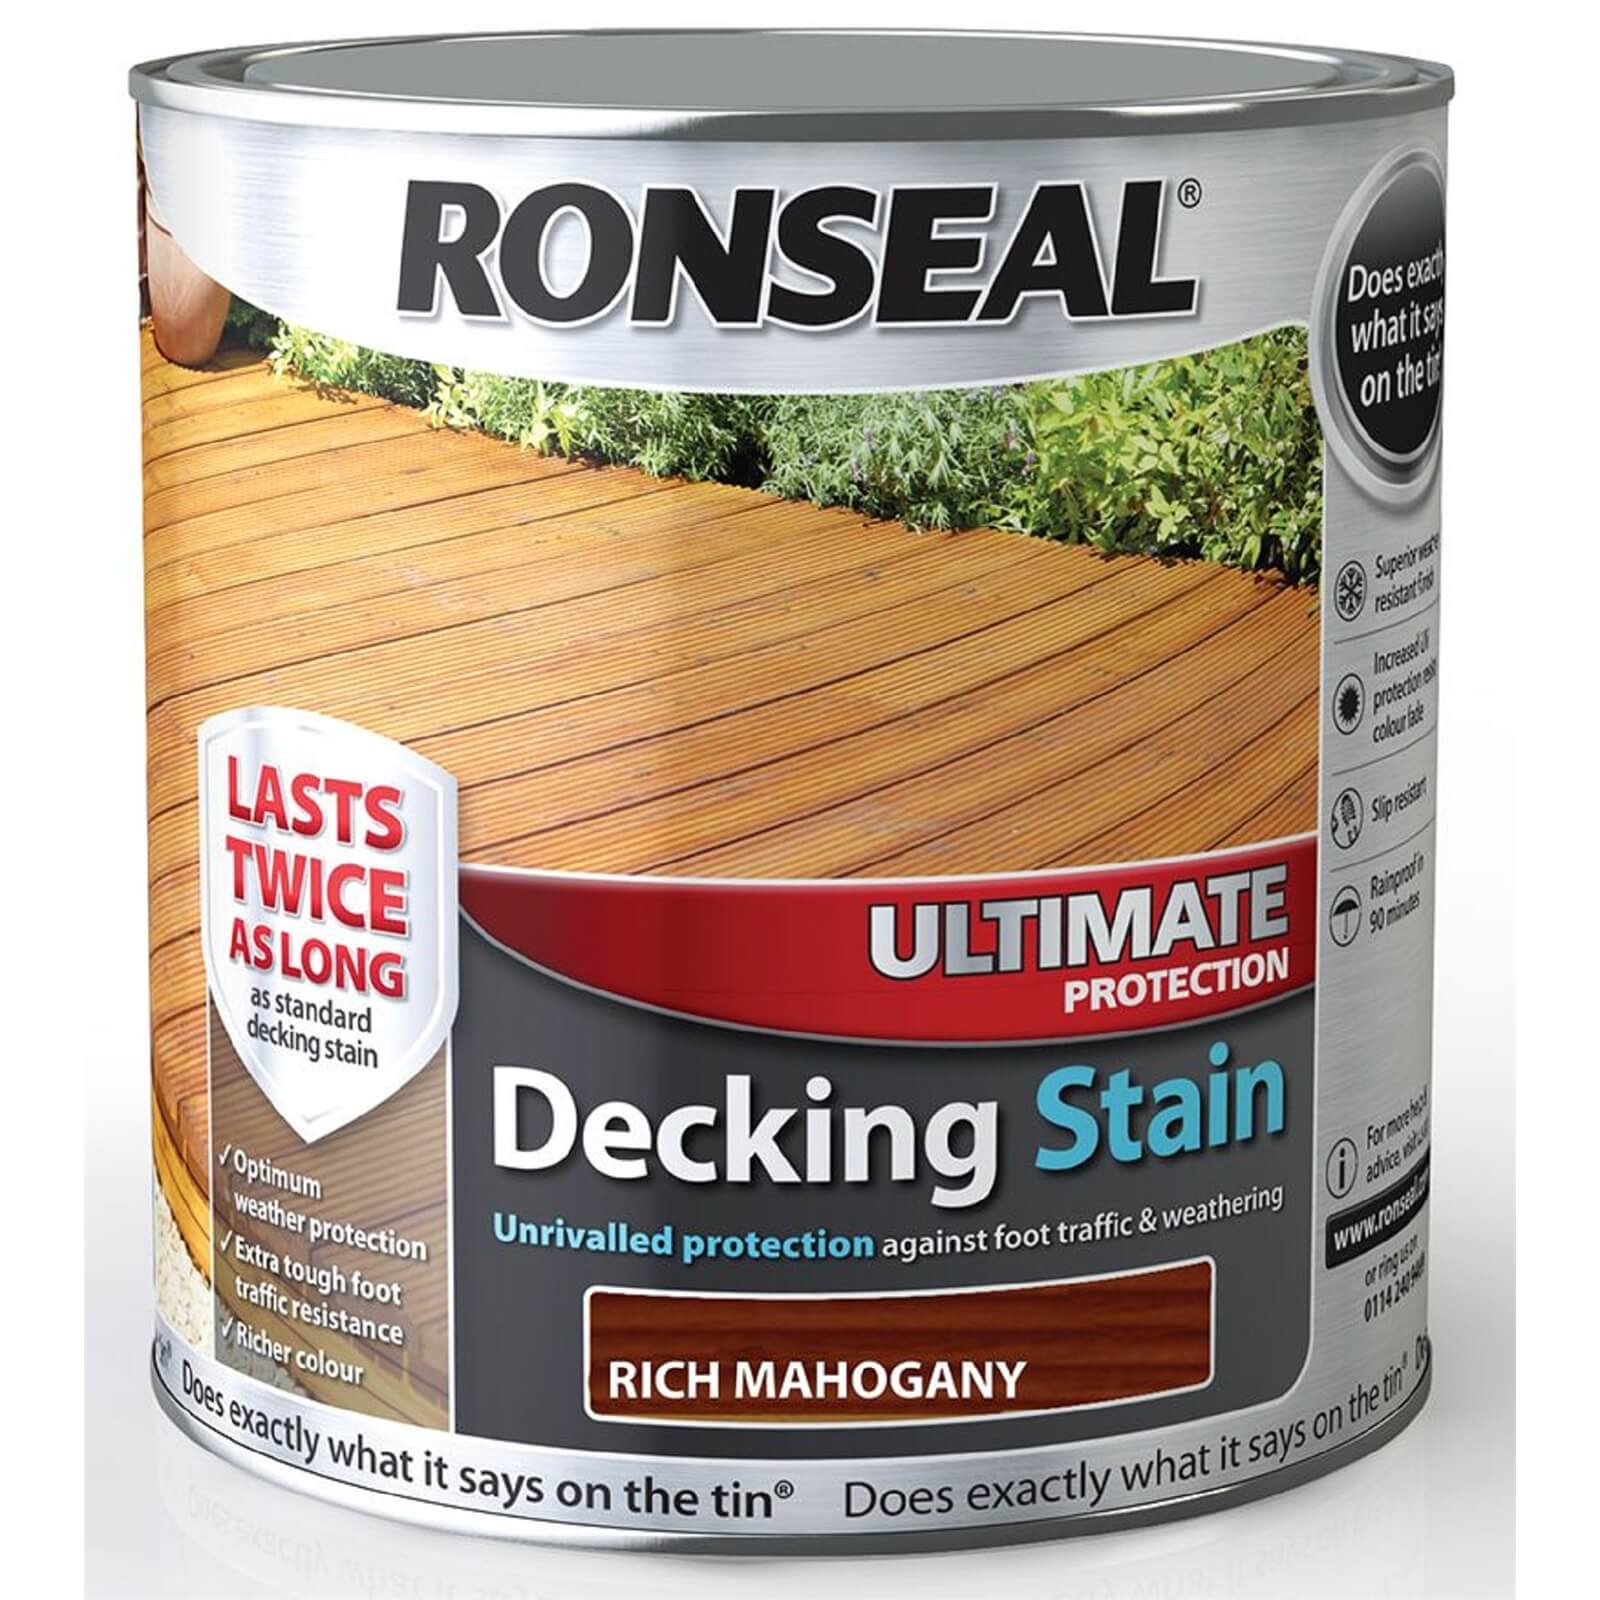 RONSEAL UIT PROTECTION DECKING STAIN R.M